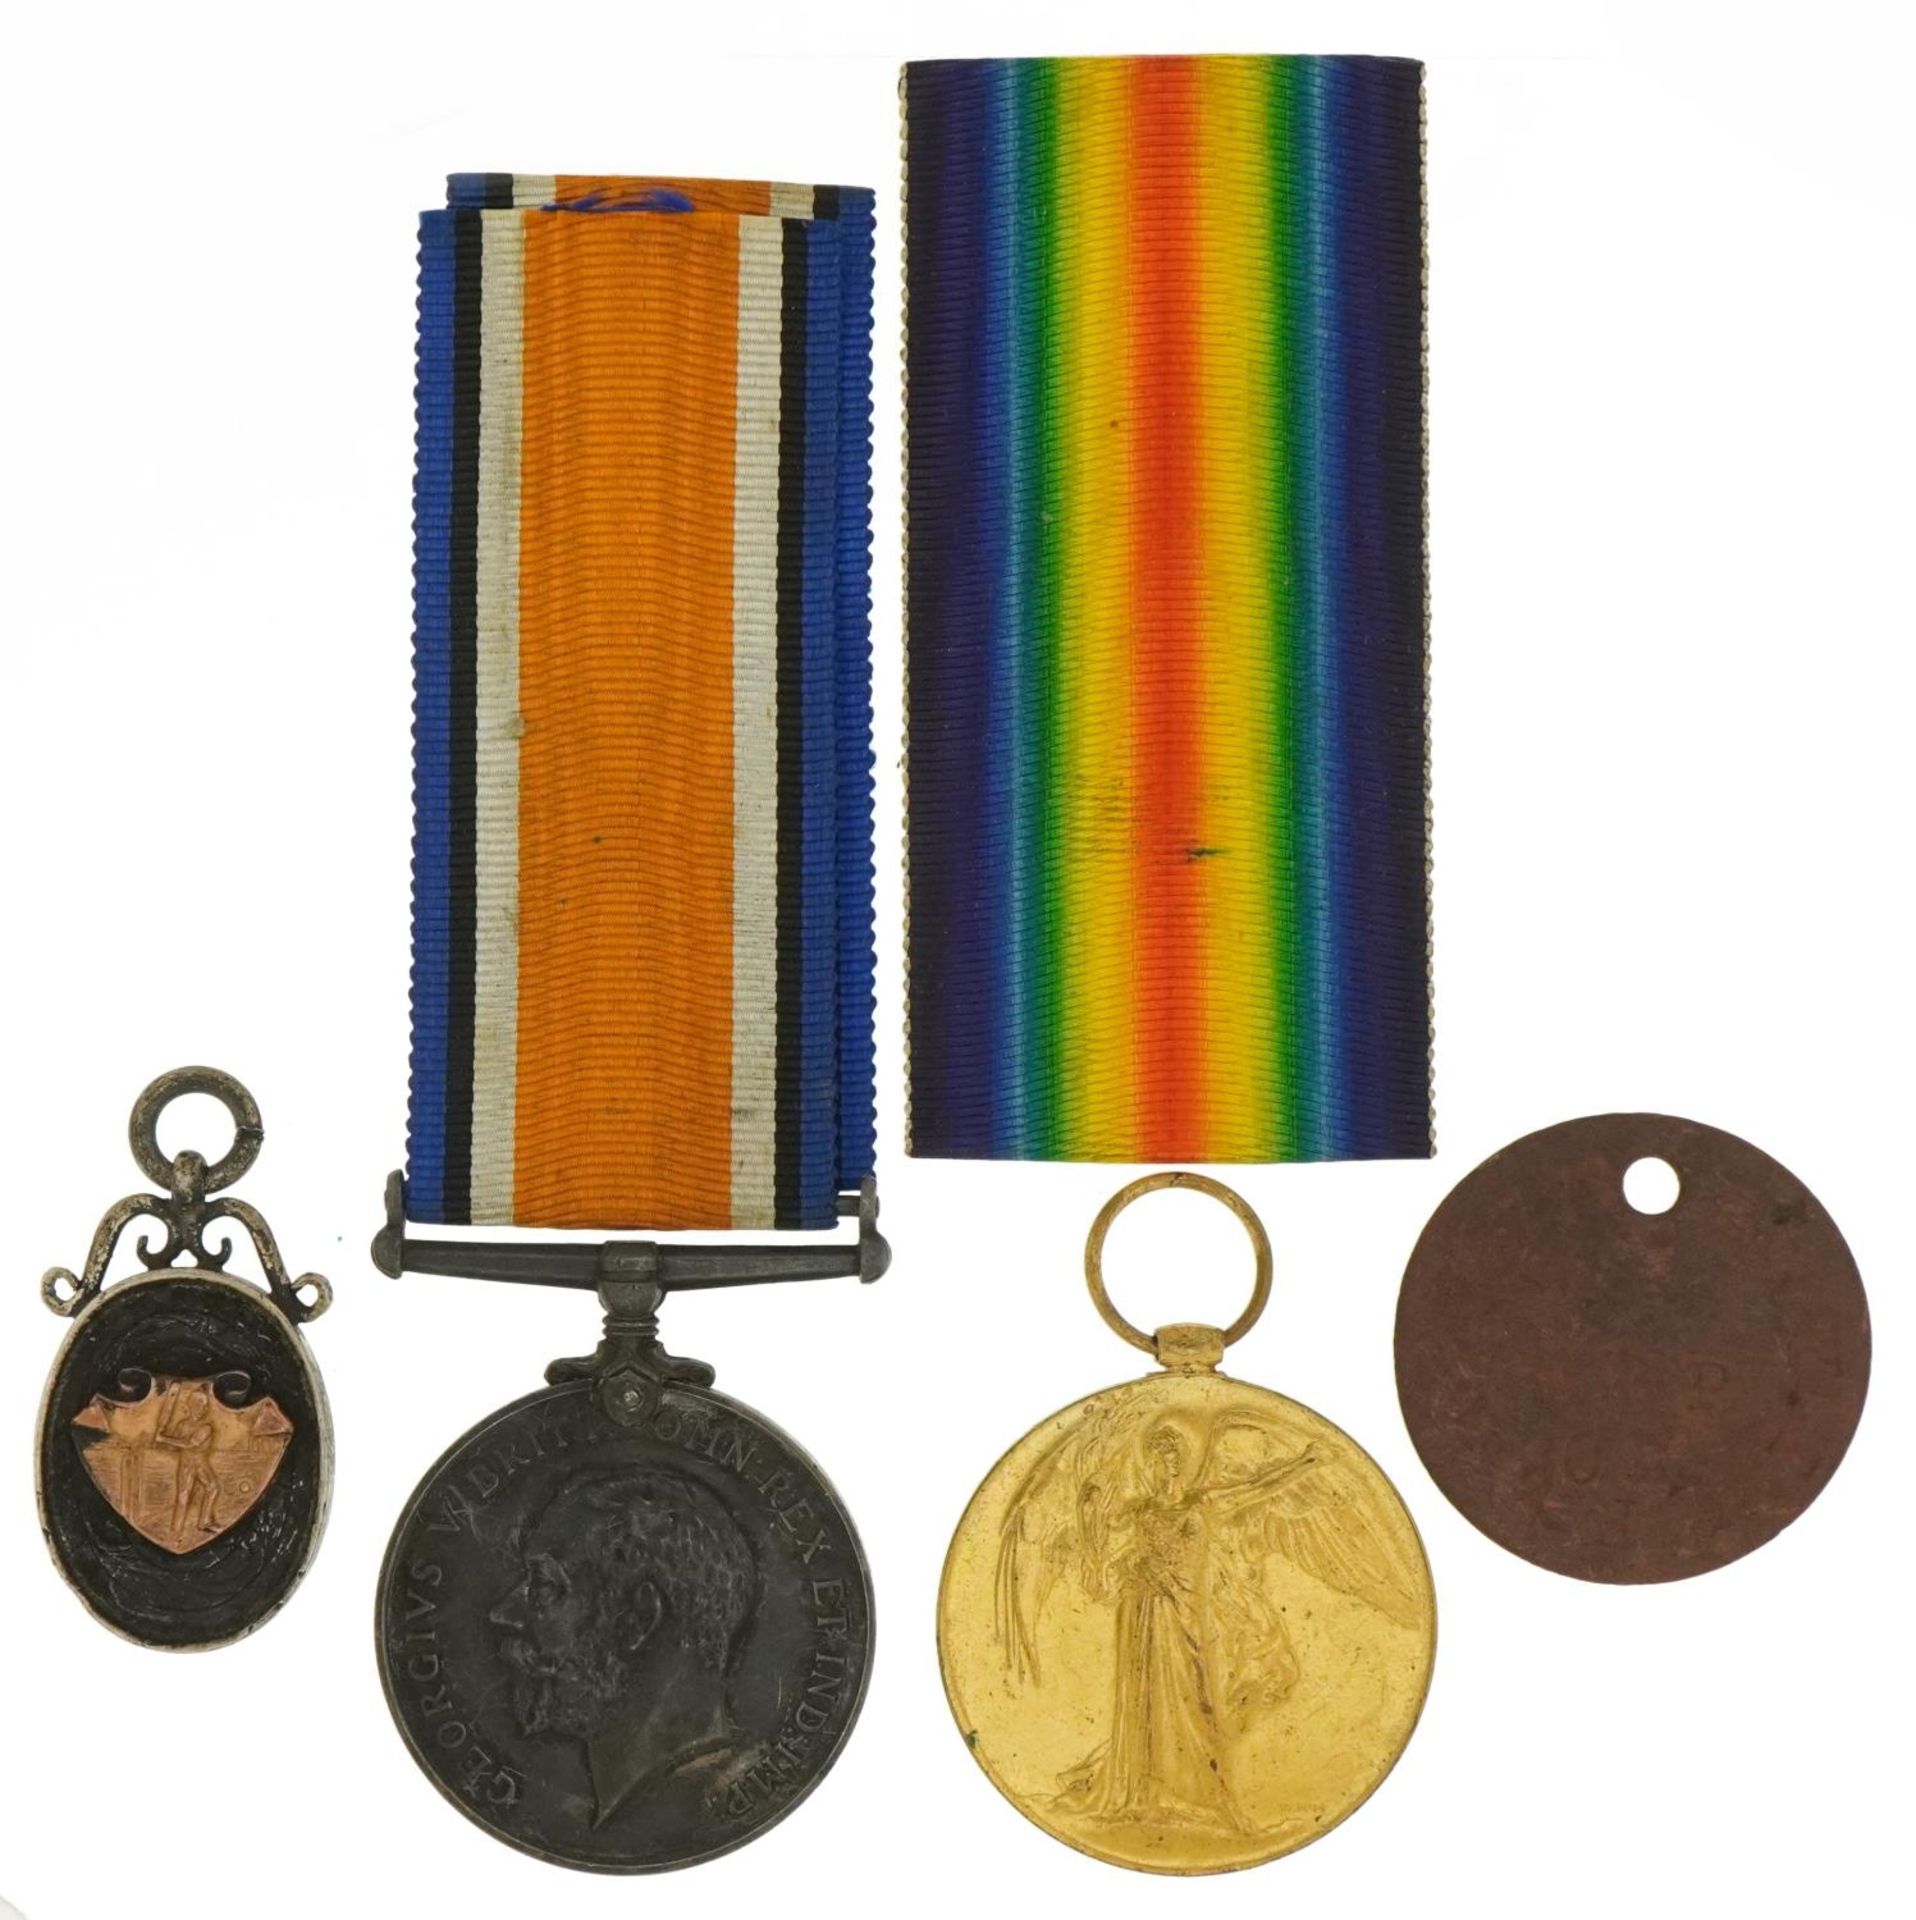 British military World War I pair with related dog tag and silver sports jewel, the pair awarded - Image 2 of 5